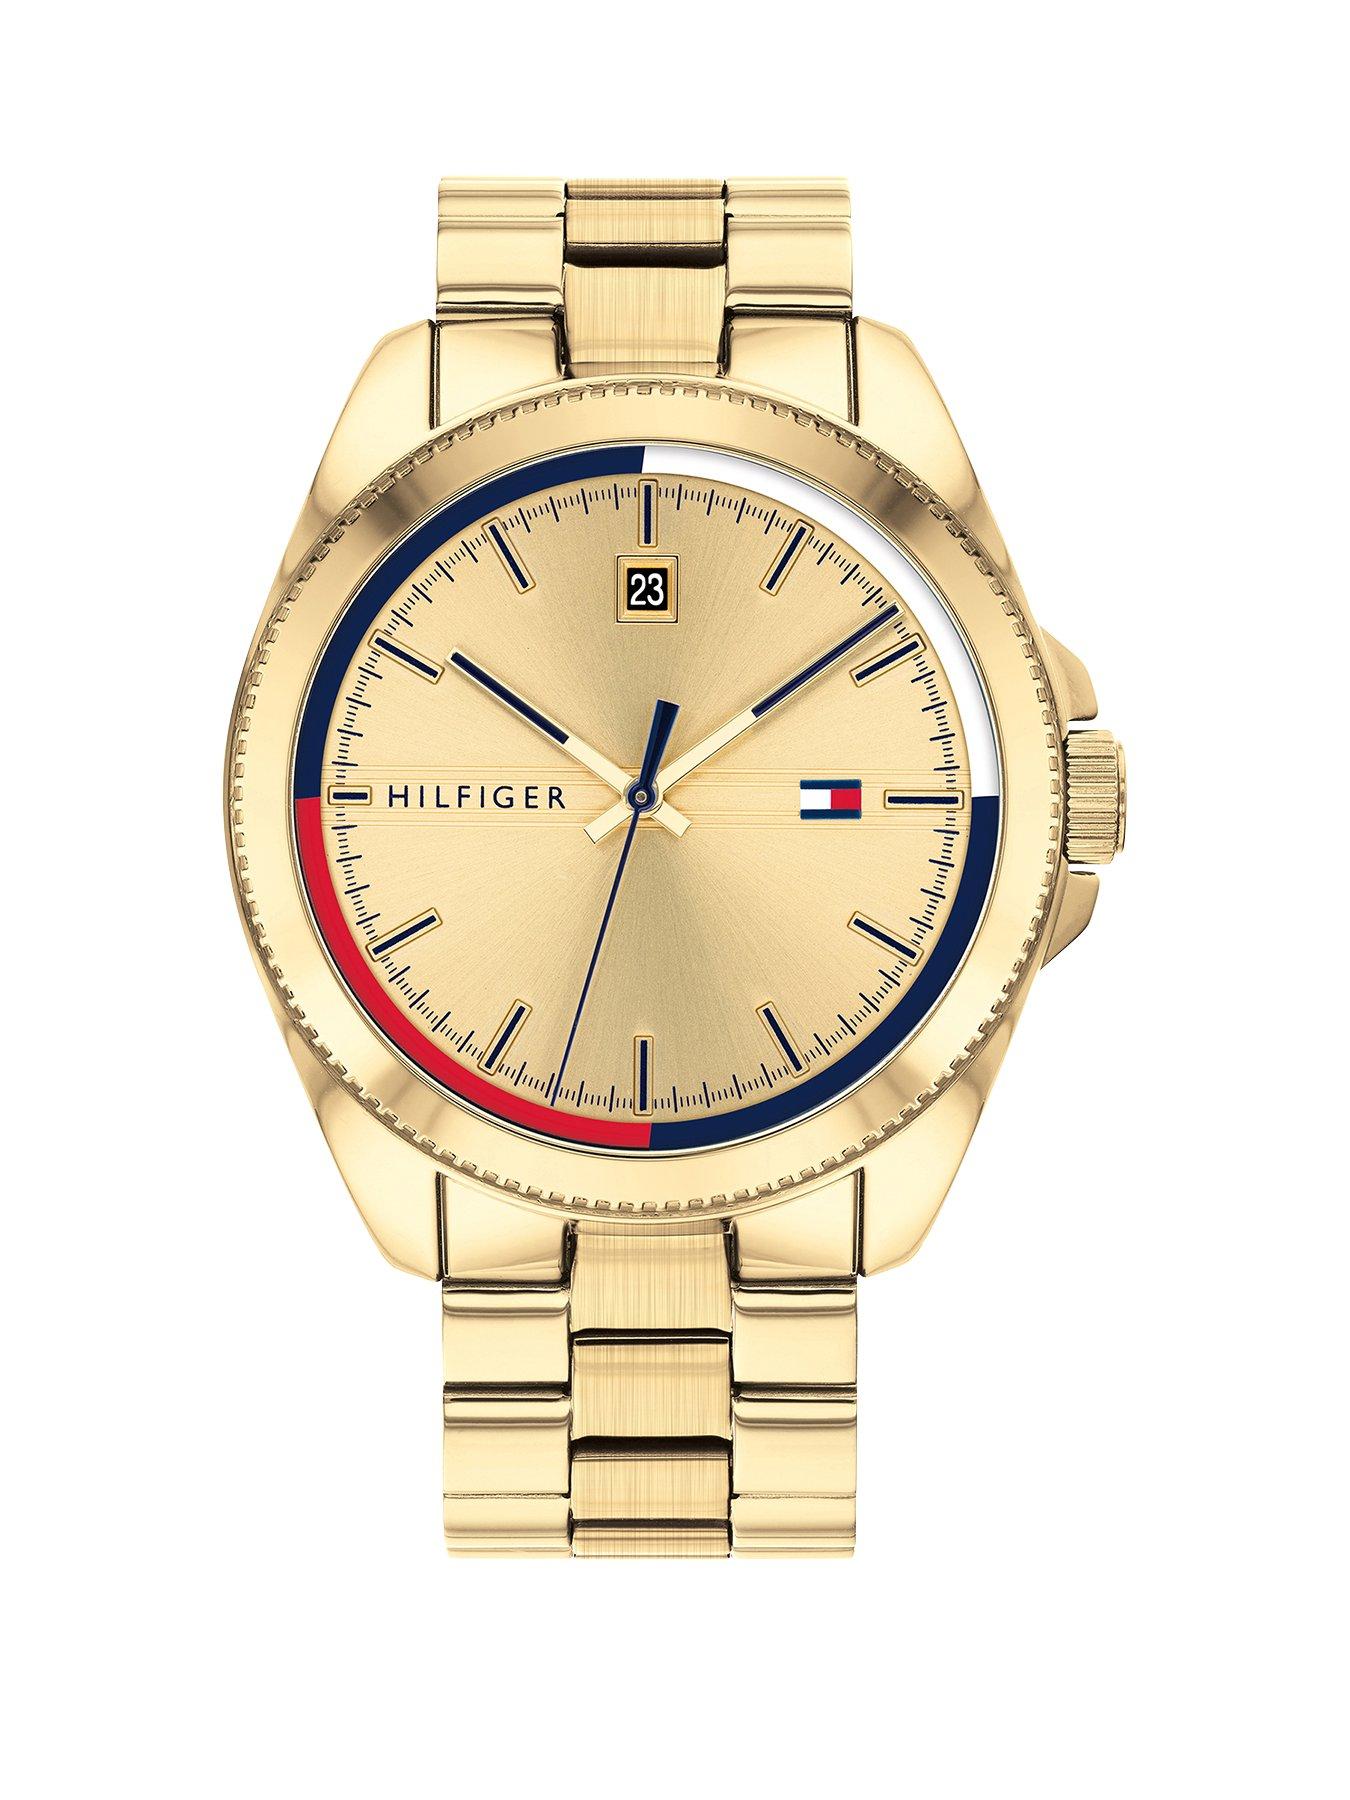 Hilfiger Riley Gold Plated Stainless Steel Gold Dial Watch | littlewoodsireland.ie